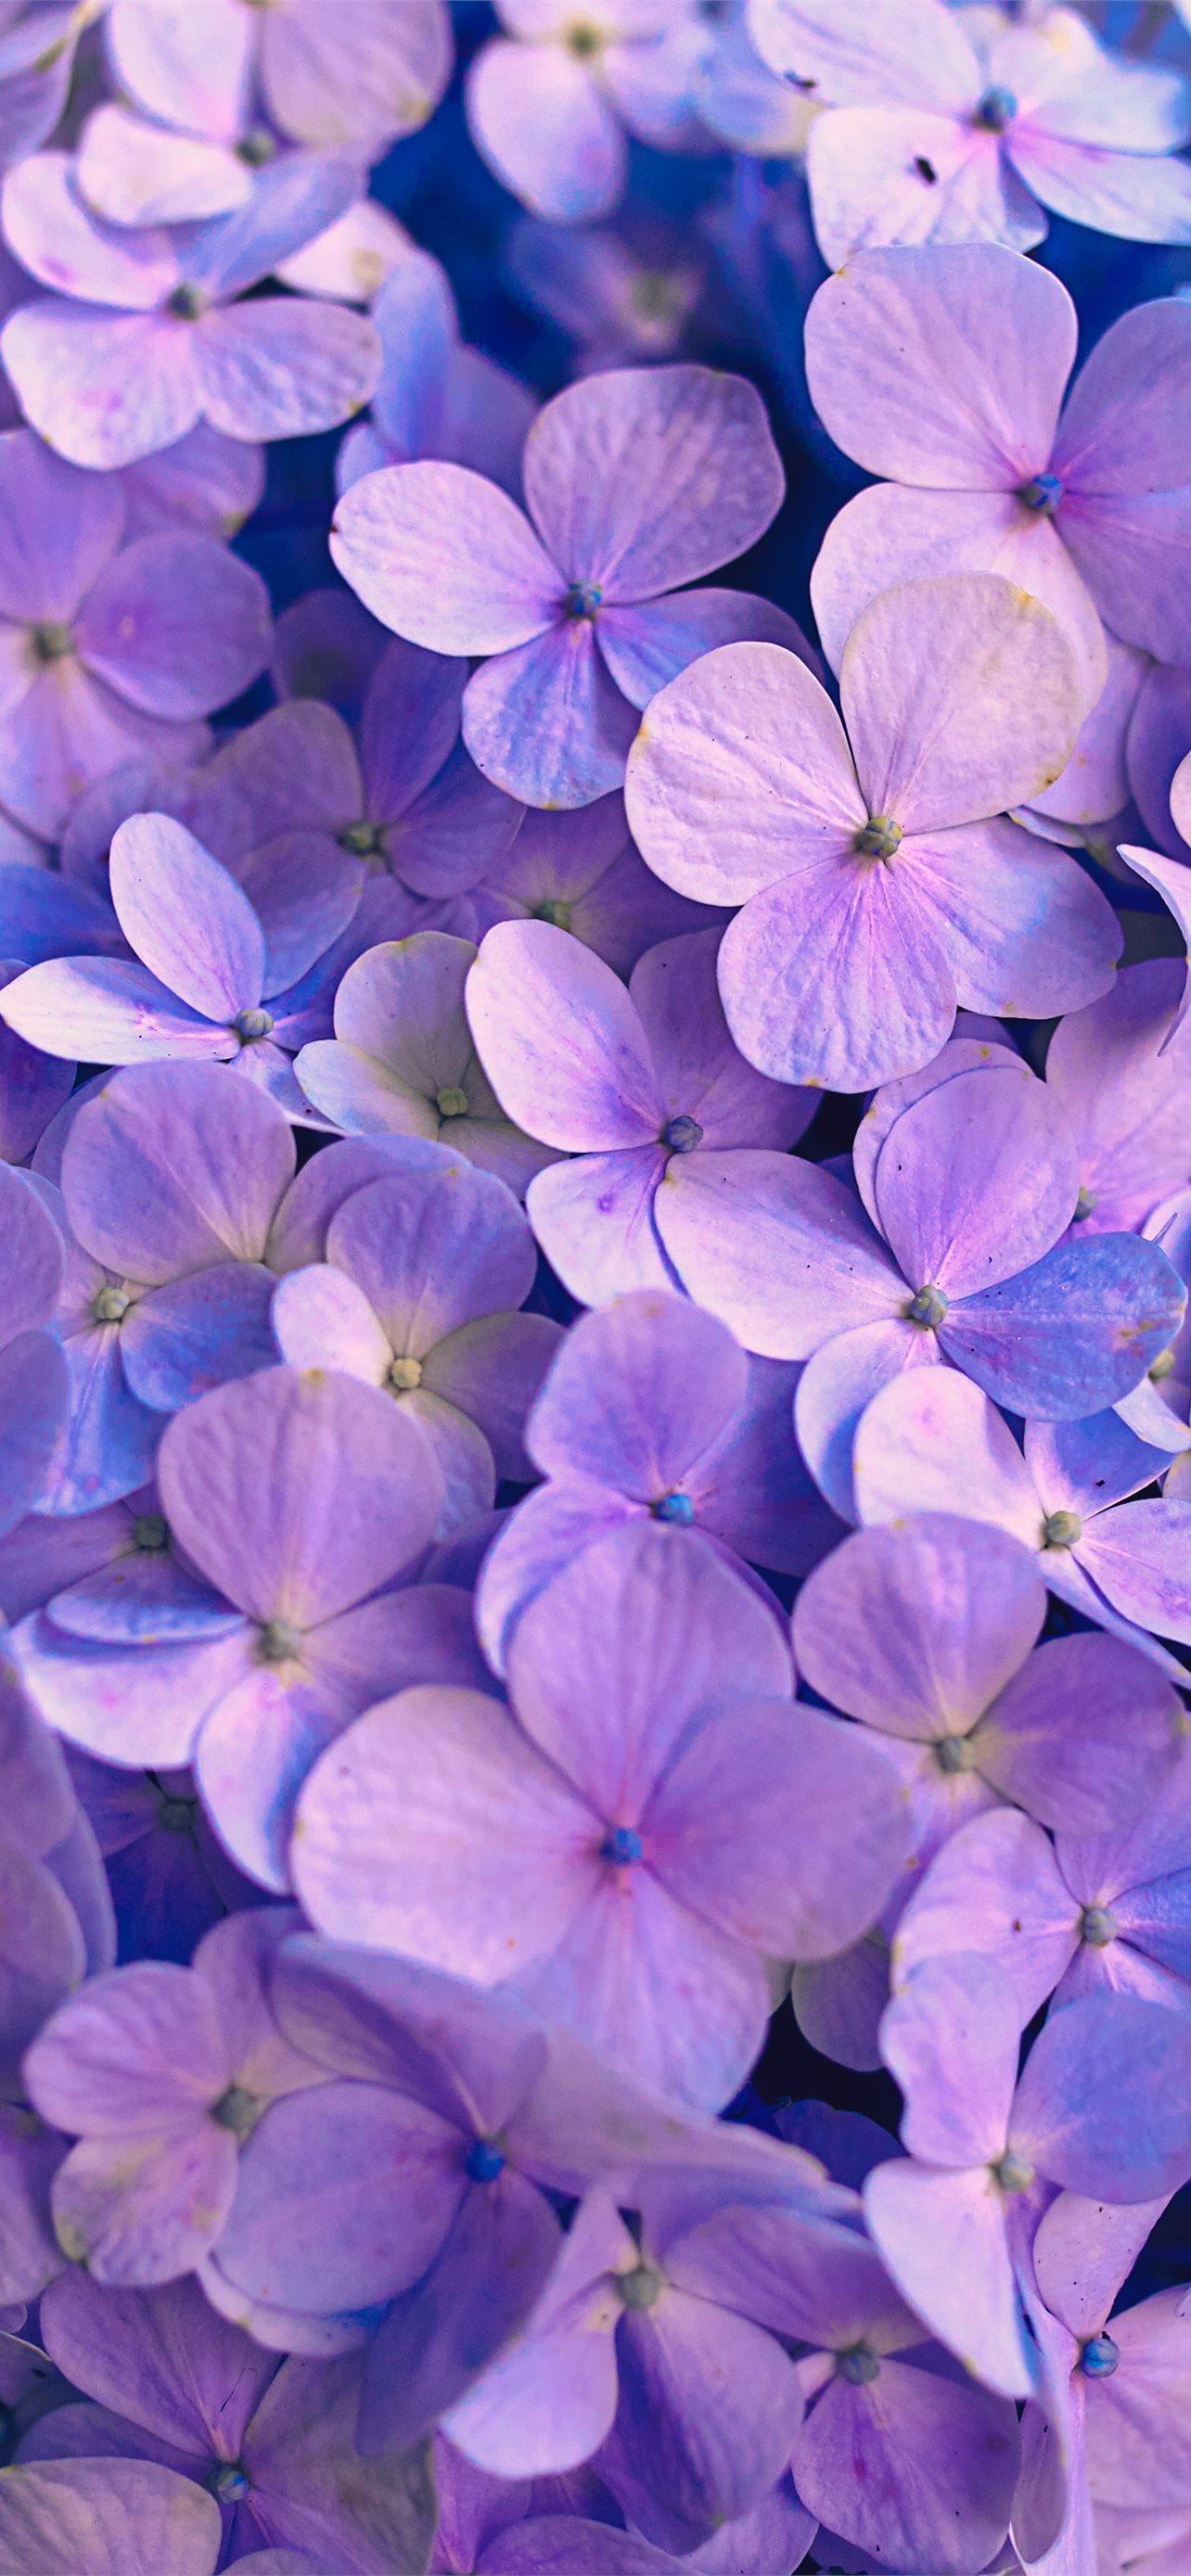 purple flowers with green leaves iPhone wallpaper 